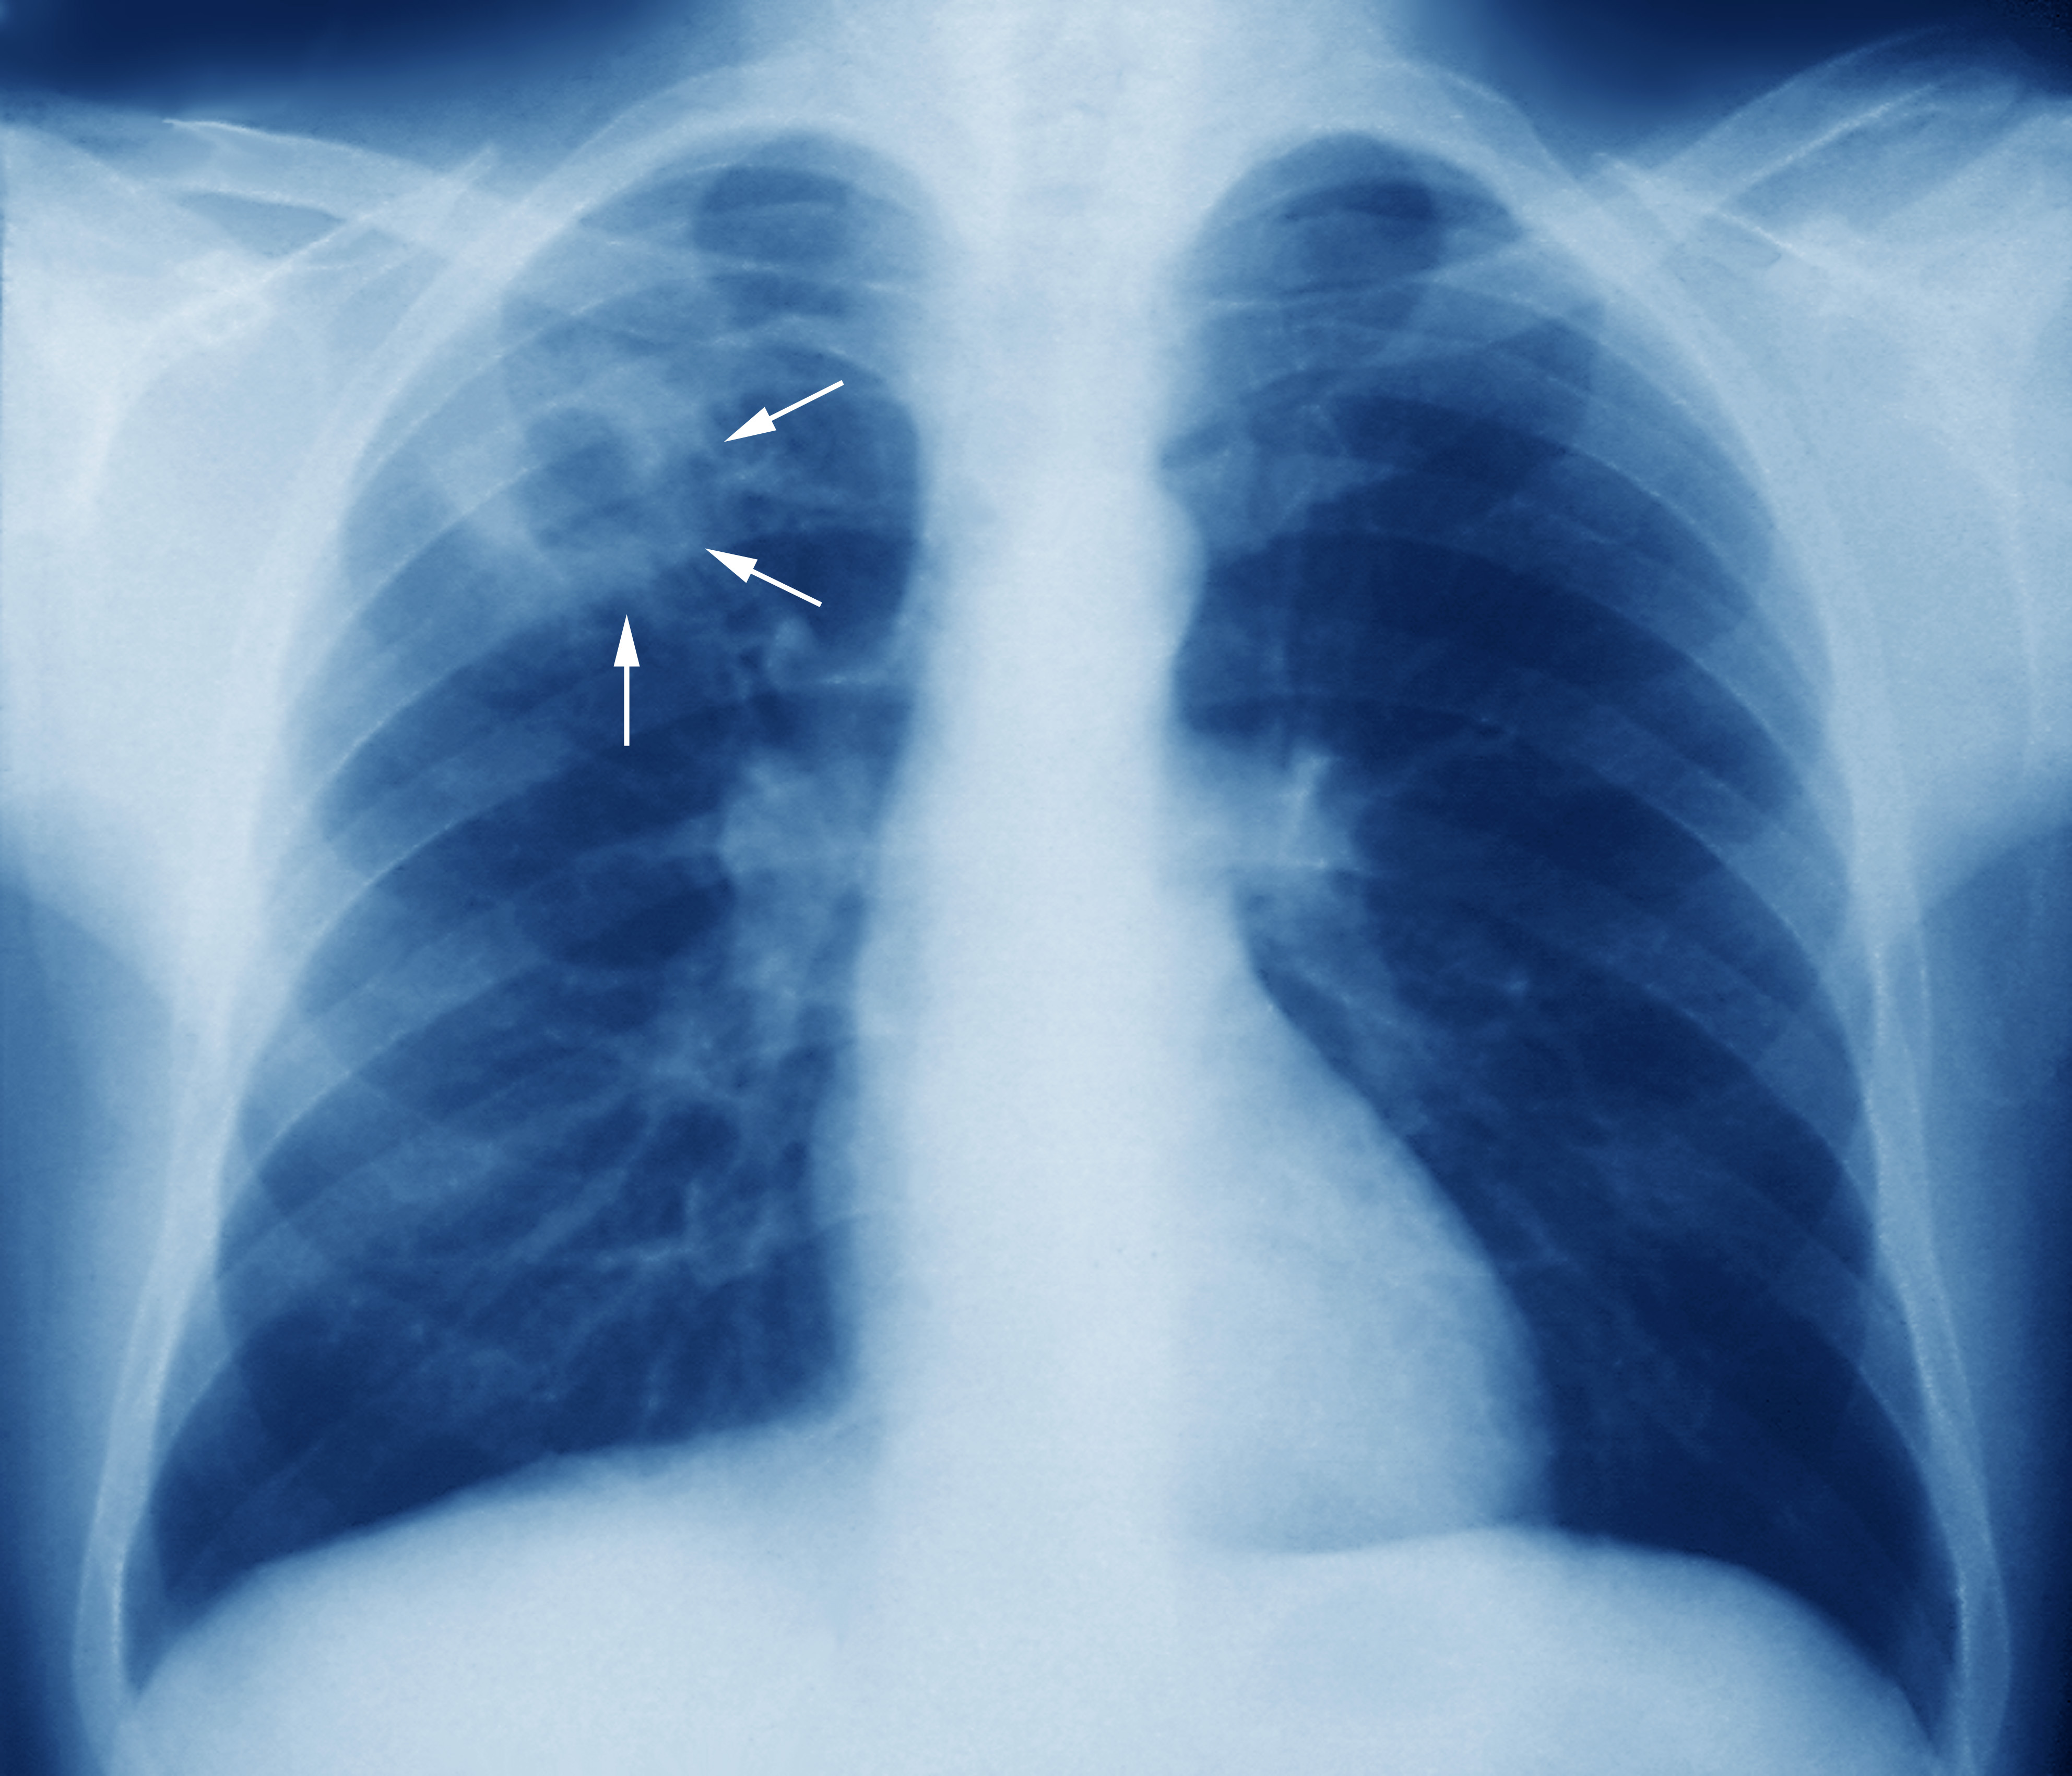 https://medro.org/wp-content/uploads/2020/12/m2700245-tuberculosis-chest-x-ray-science-photo-library-high.jpg